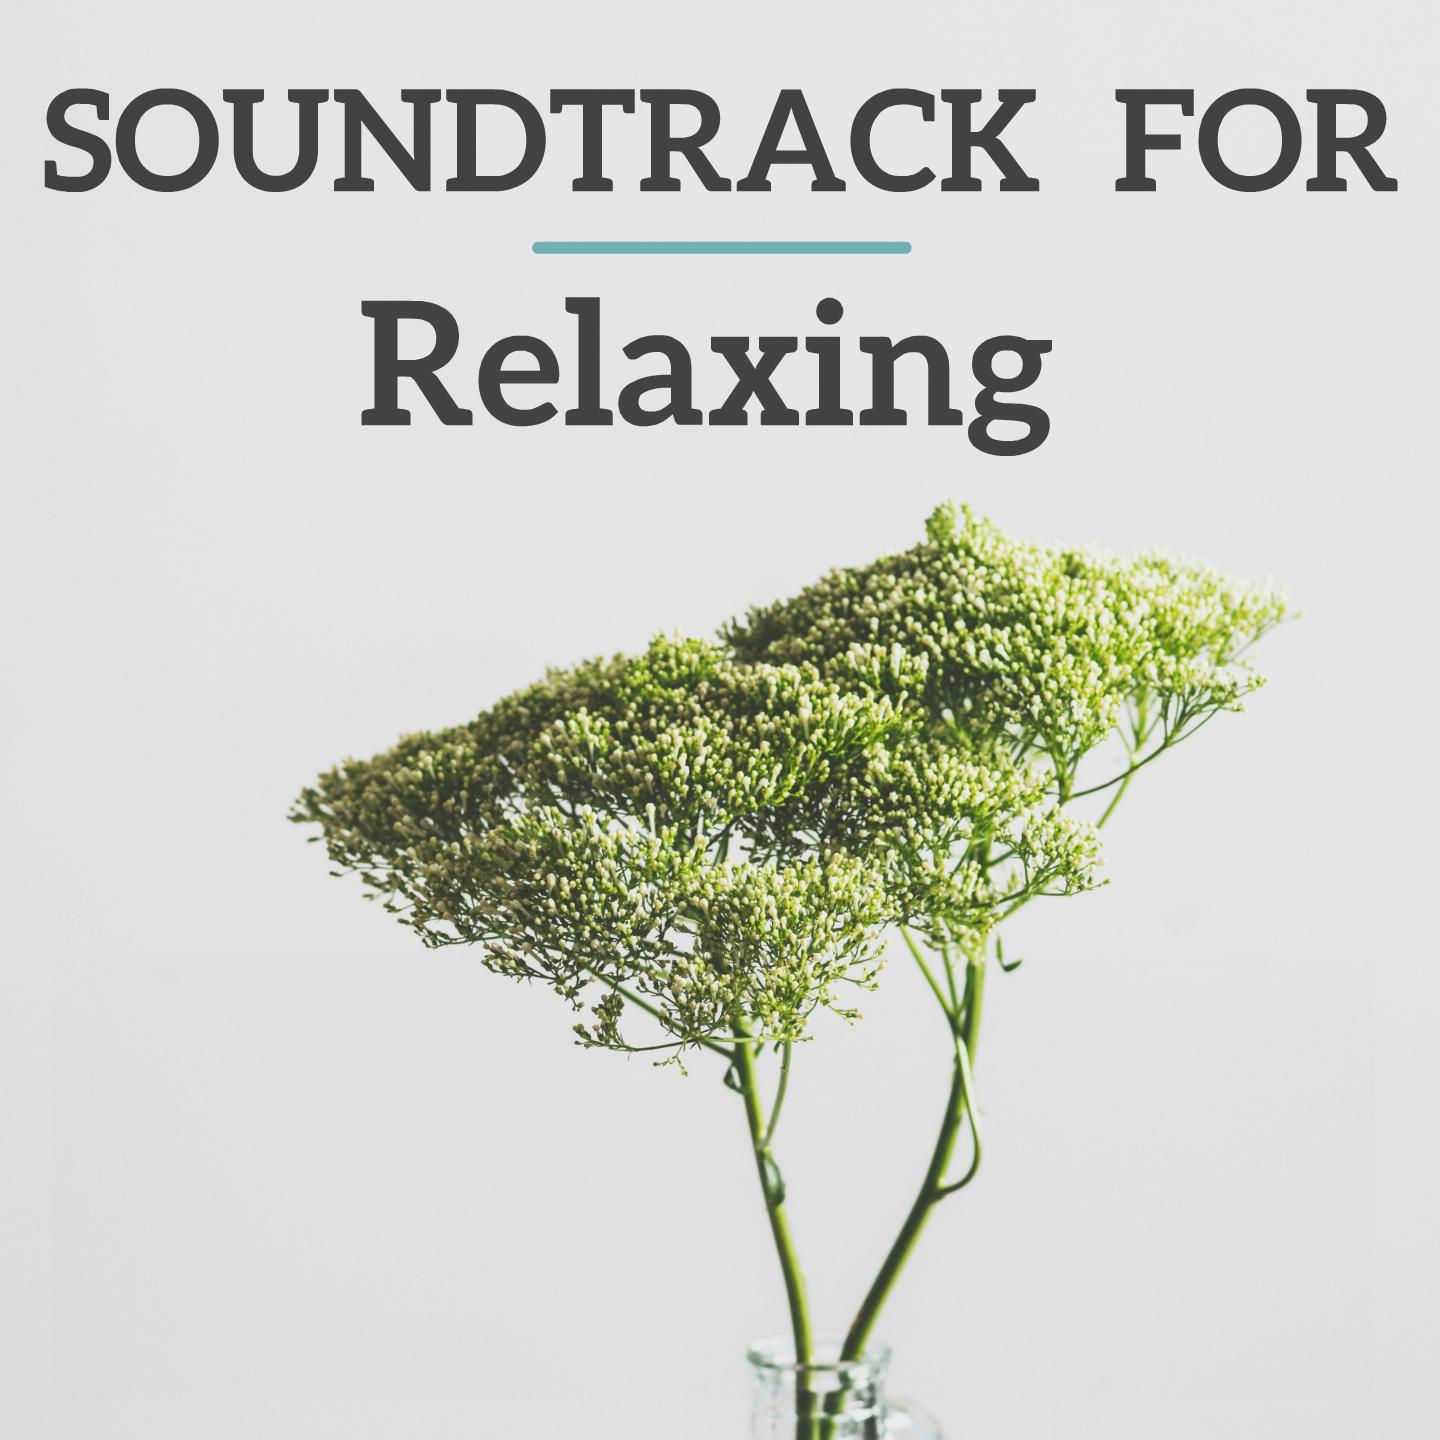 Soundtrack for Relaxing